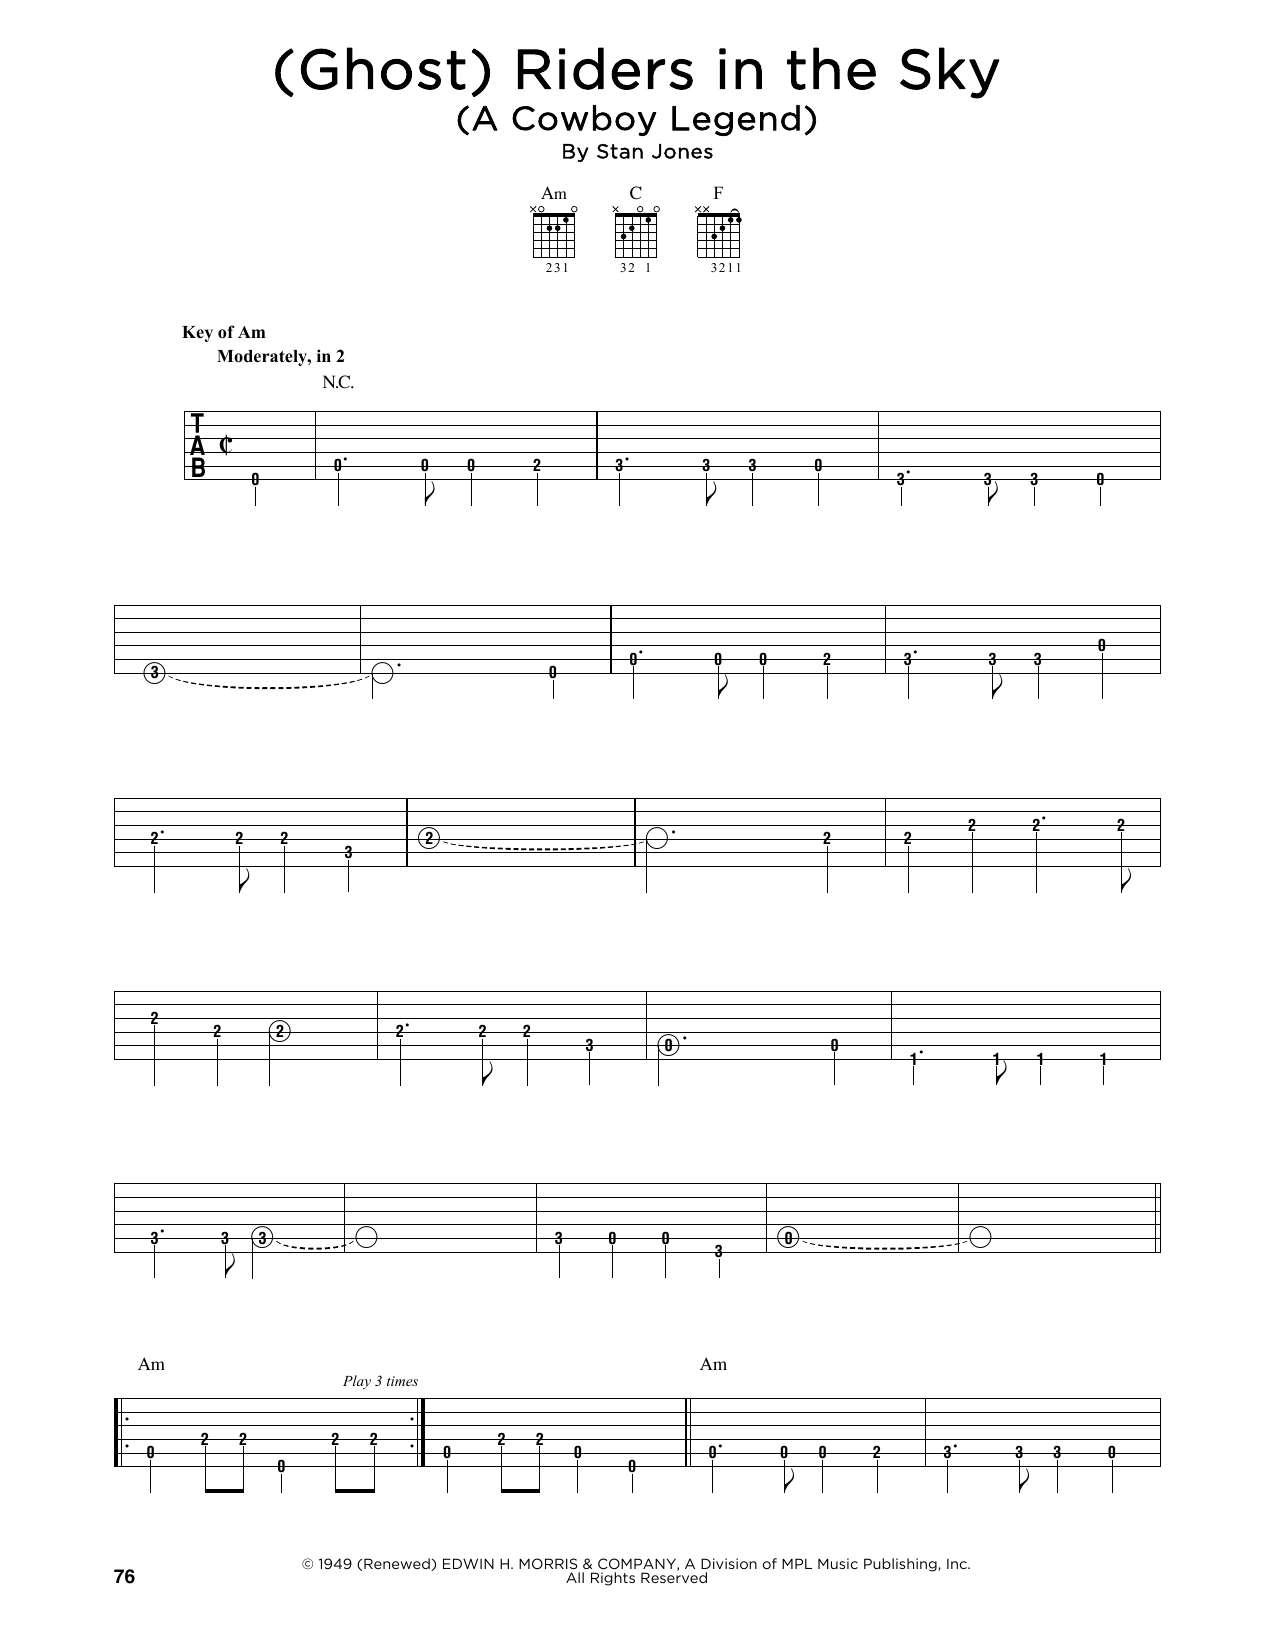 Johnny Cash (Ghost) Riders In The Sky (A Cowboy Legend) sheet music notes printable PDF score